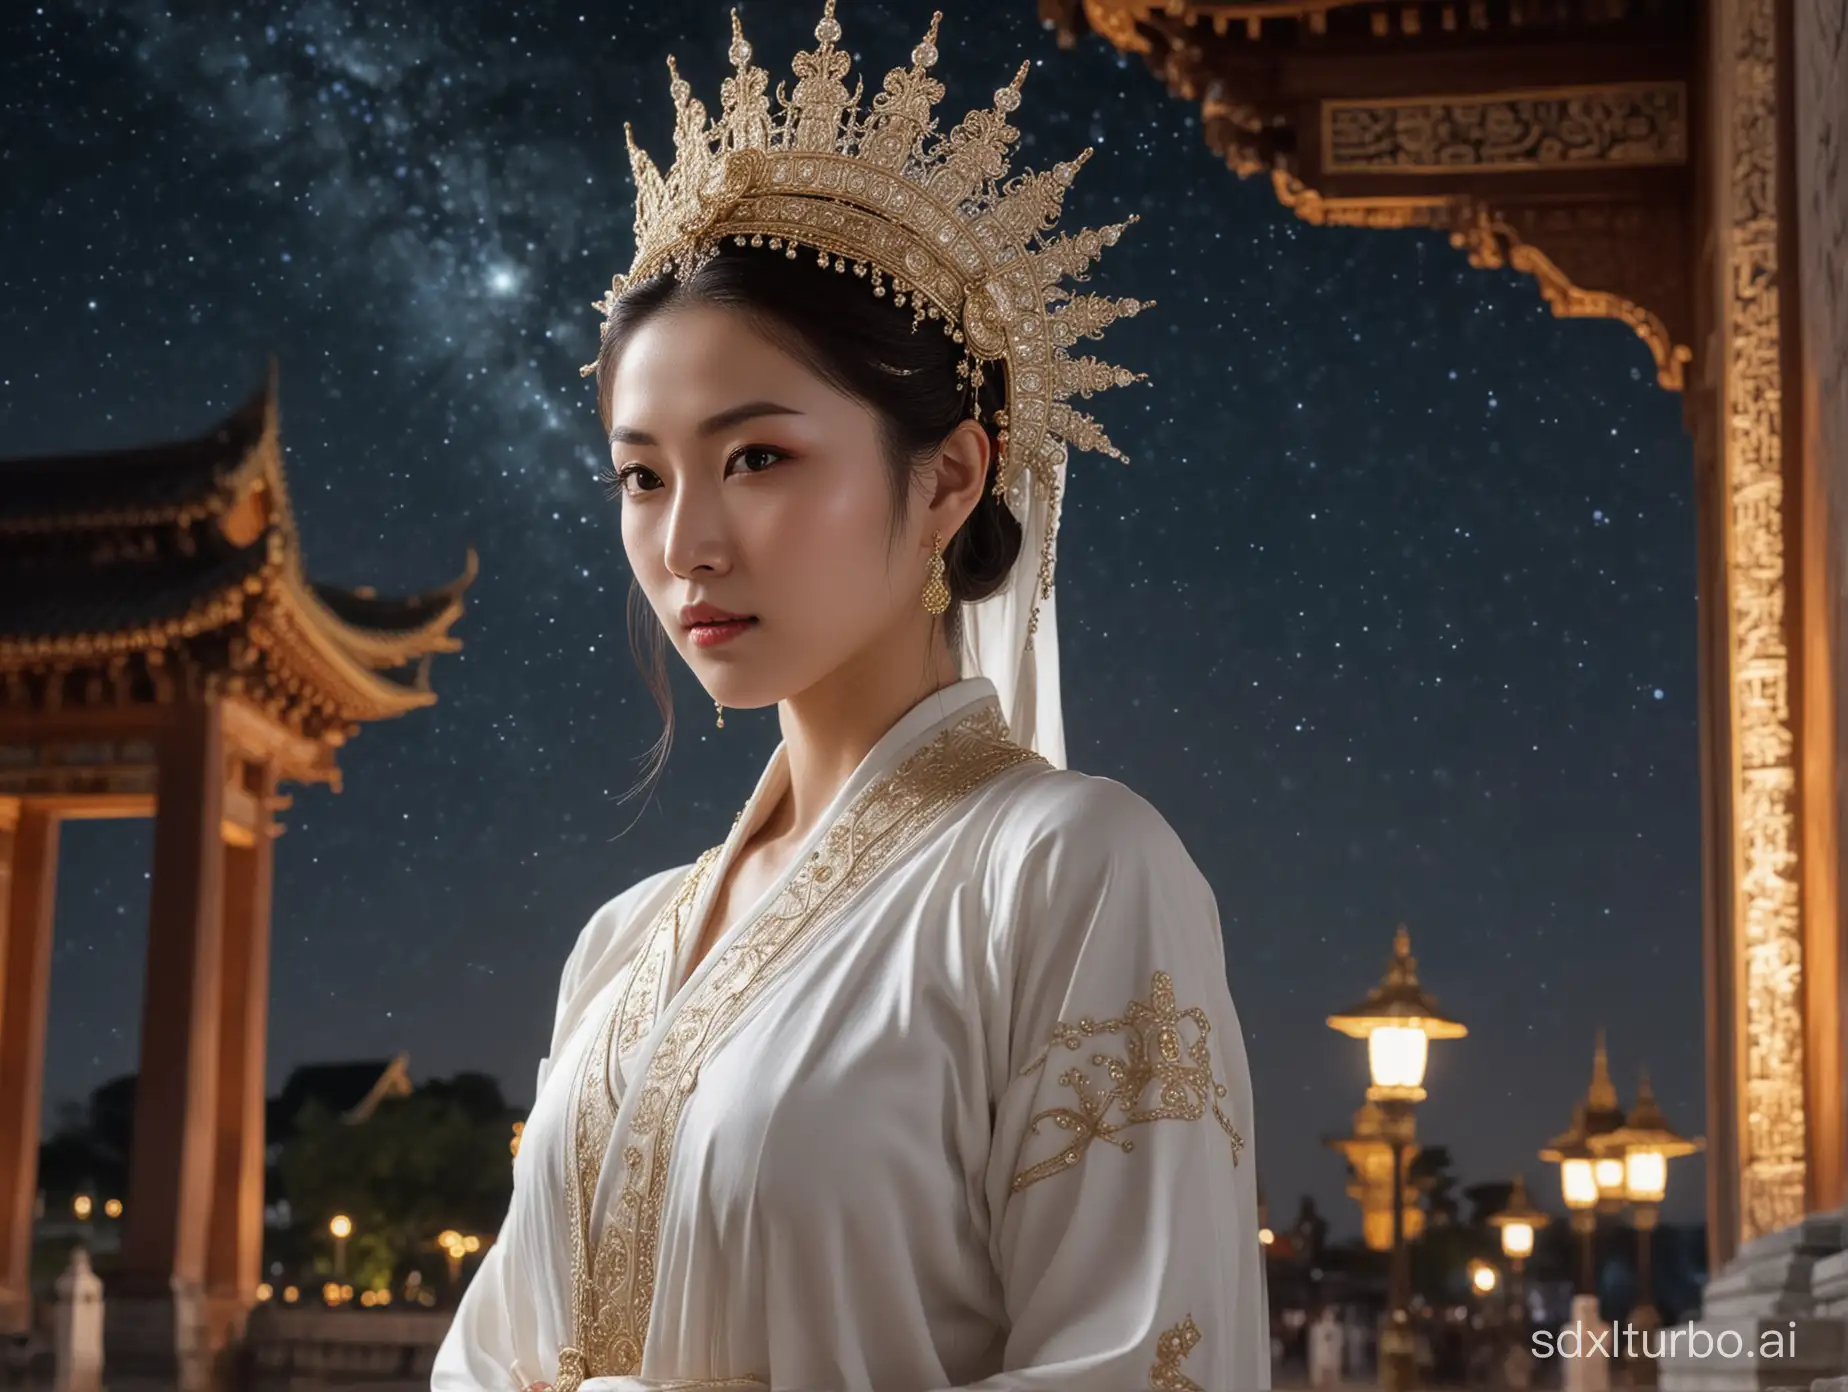 A female bodhisattva with a strong sense of future technology , she has fair skin and a graceful figure. dressed in white robes.beautiful headdress, chest ornament. (Salasadi) appears in front of the palace gate wearing sparkling clothing, with a visual highlight and deep eyes. The picture begins with a starry sky, and gradually zooms in on the shining Buddhist palace.